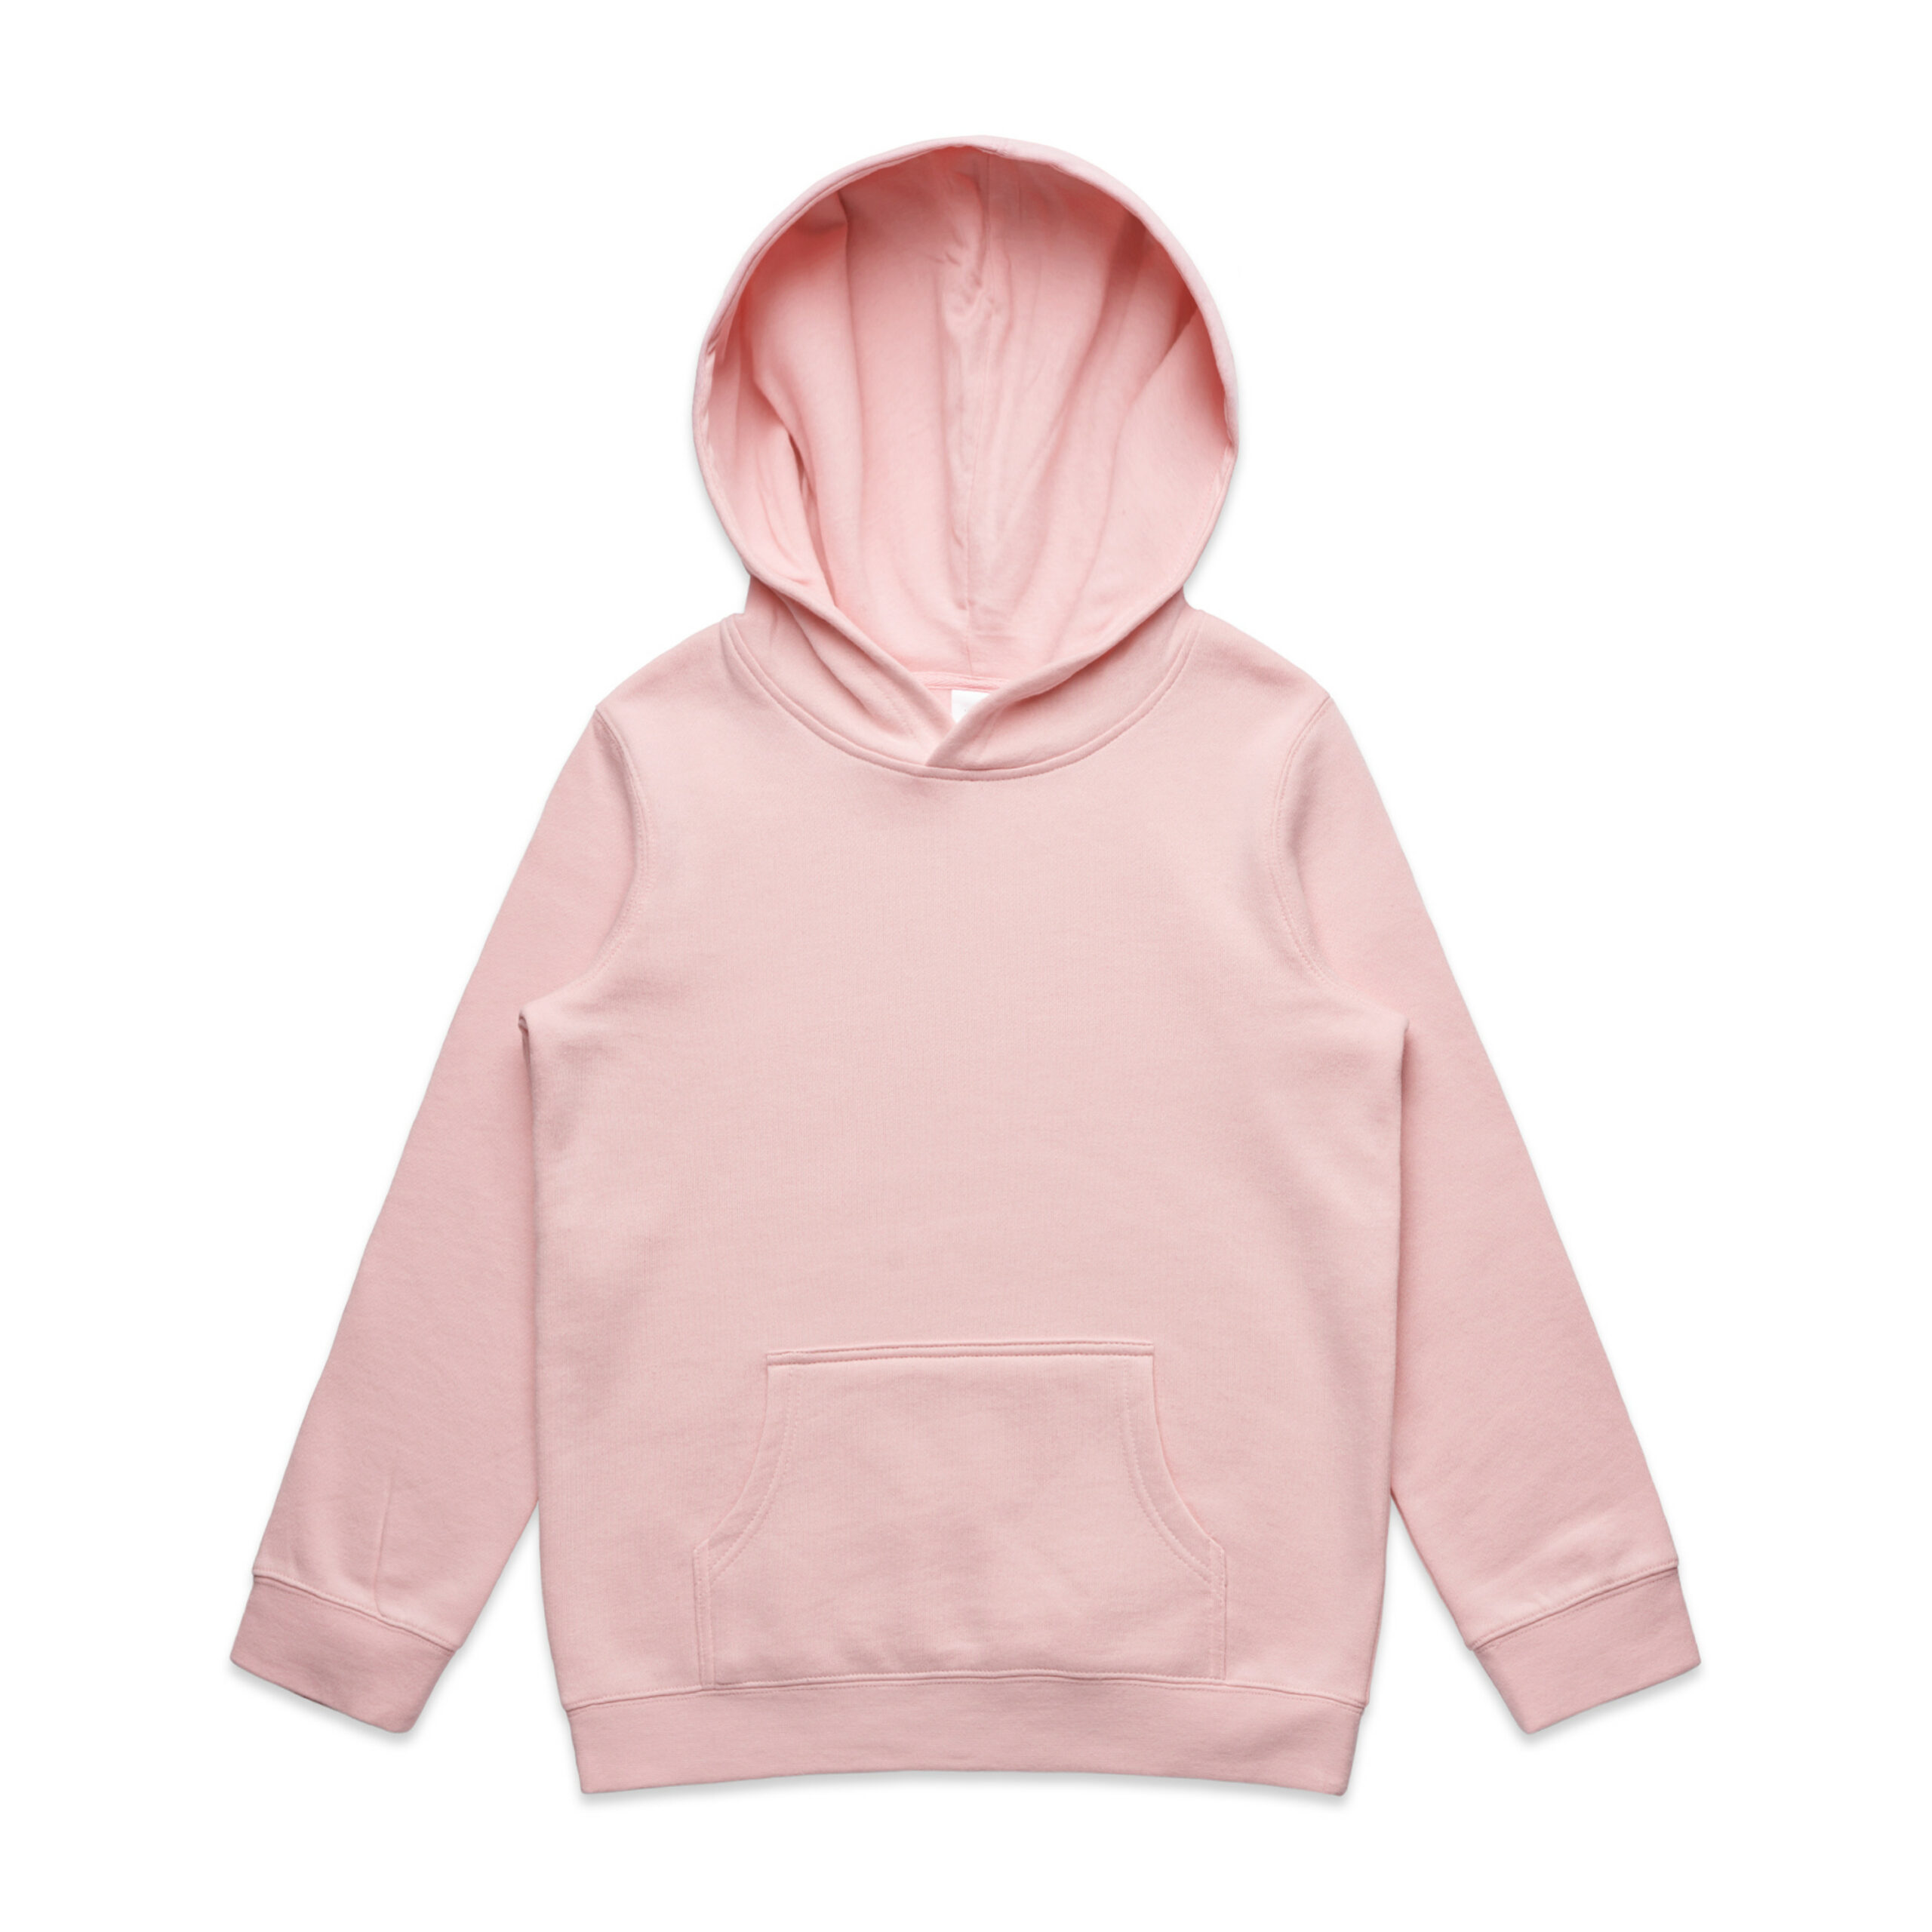 3033_YOUTH_SUPPLY_HOOD_PINK__92505